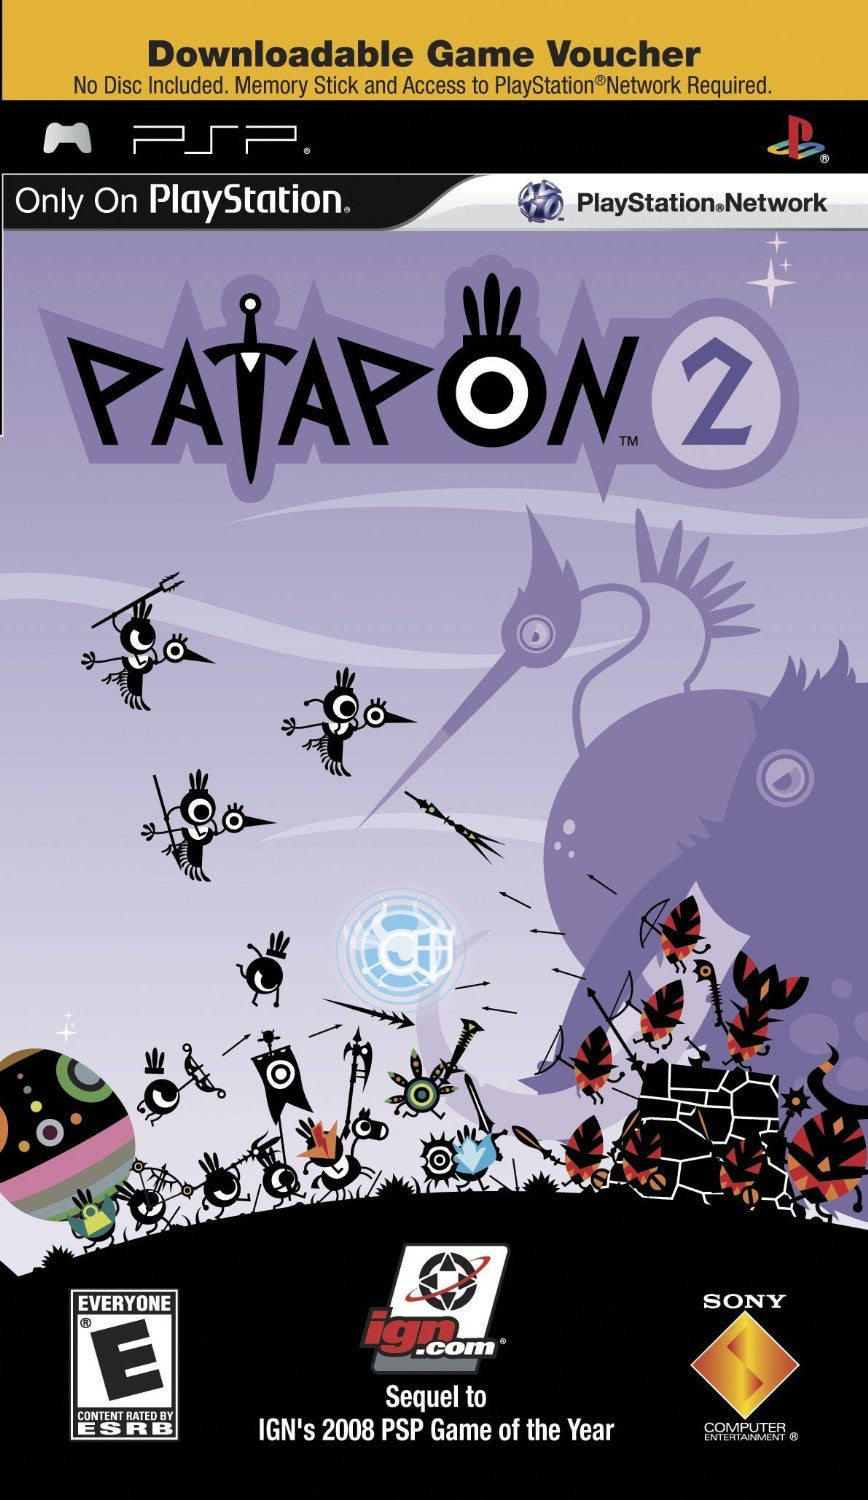 Patapon 2 (Downloadable Game Voucher) - Sony PSP